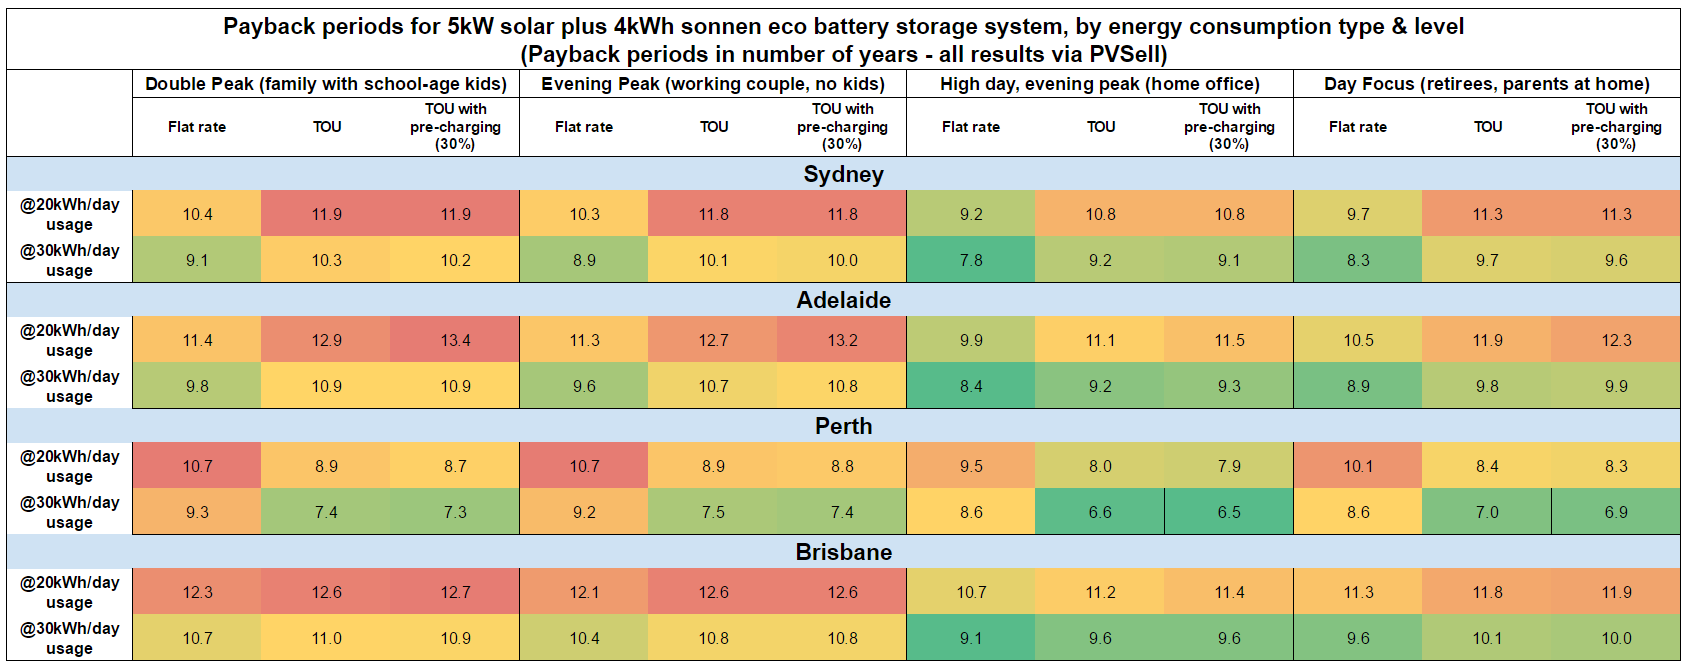 Battery payback periods by consumption type and city